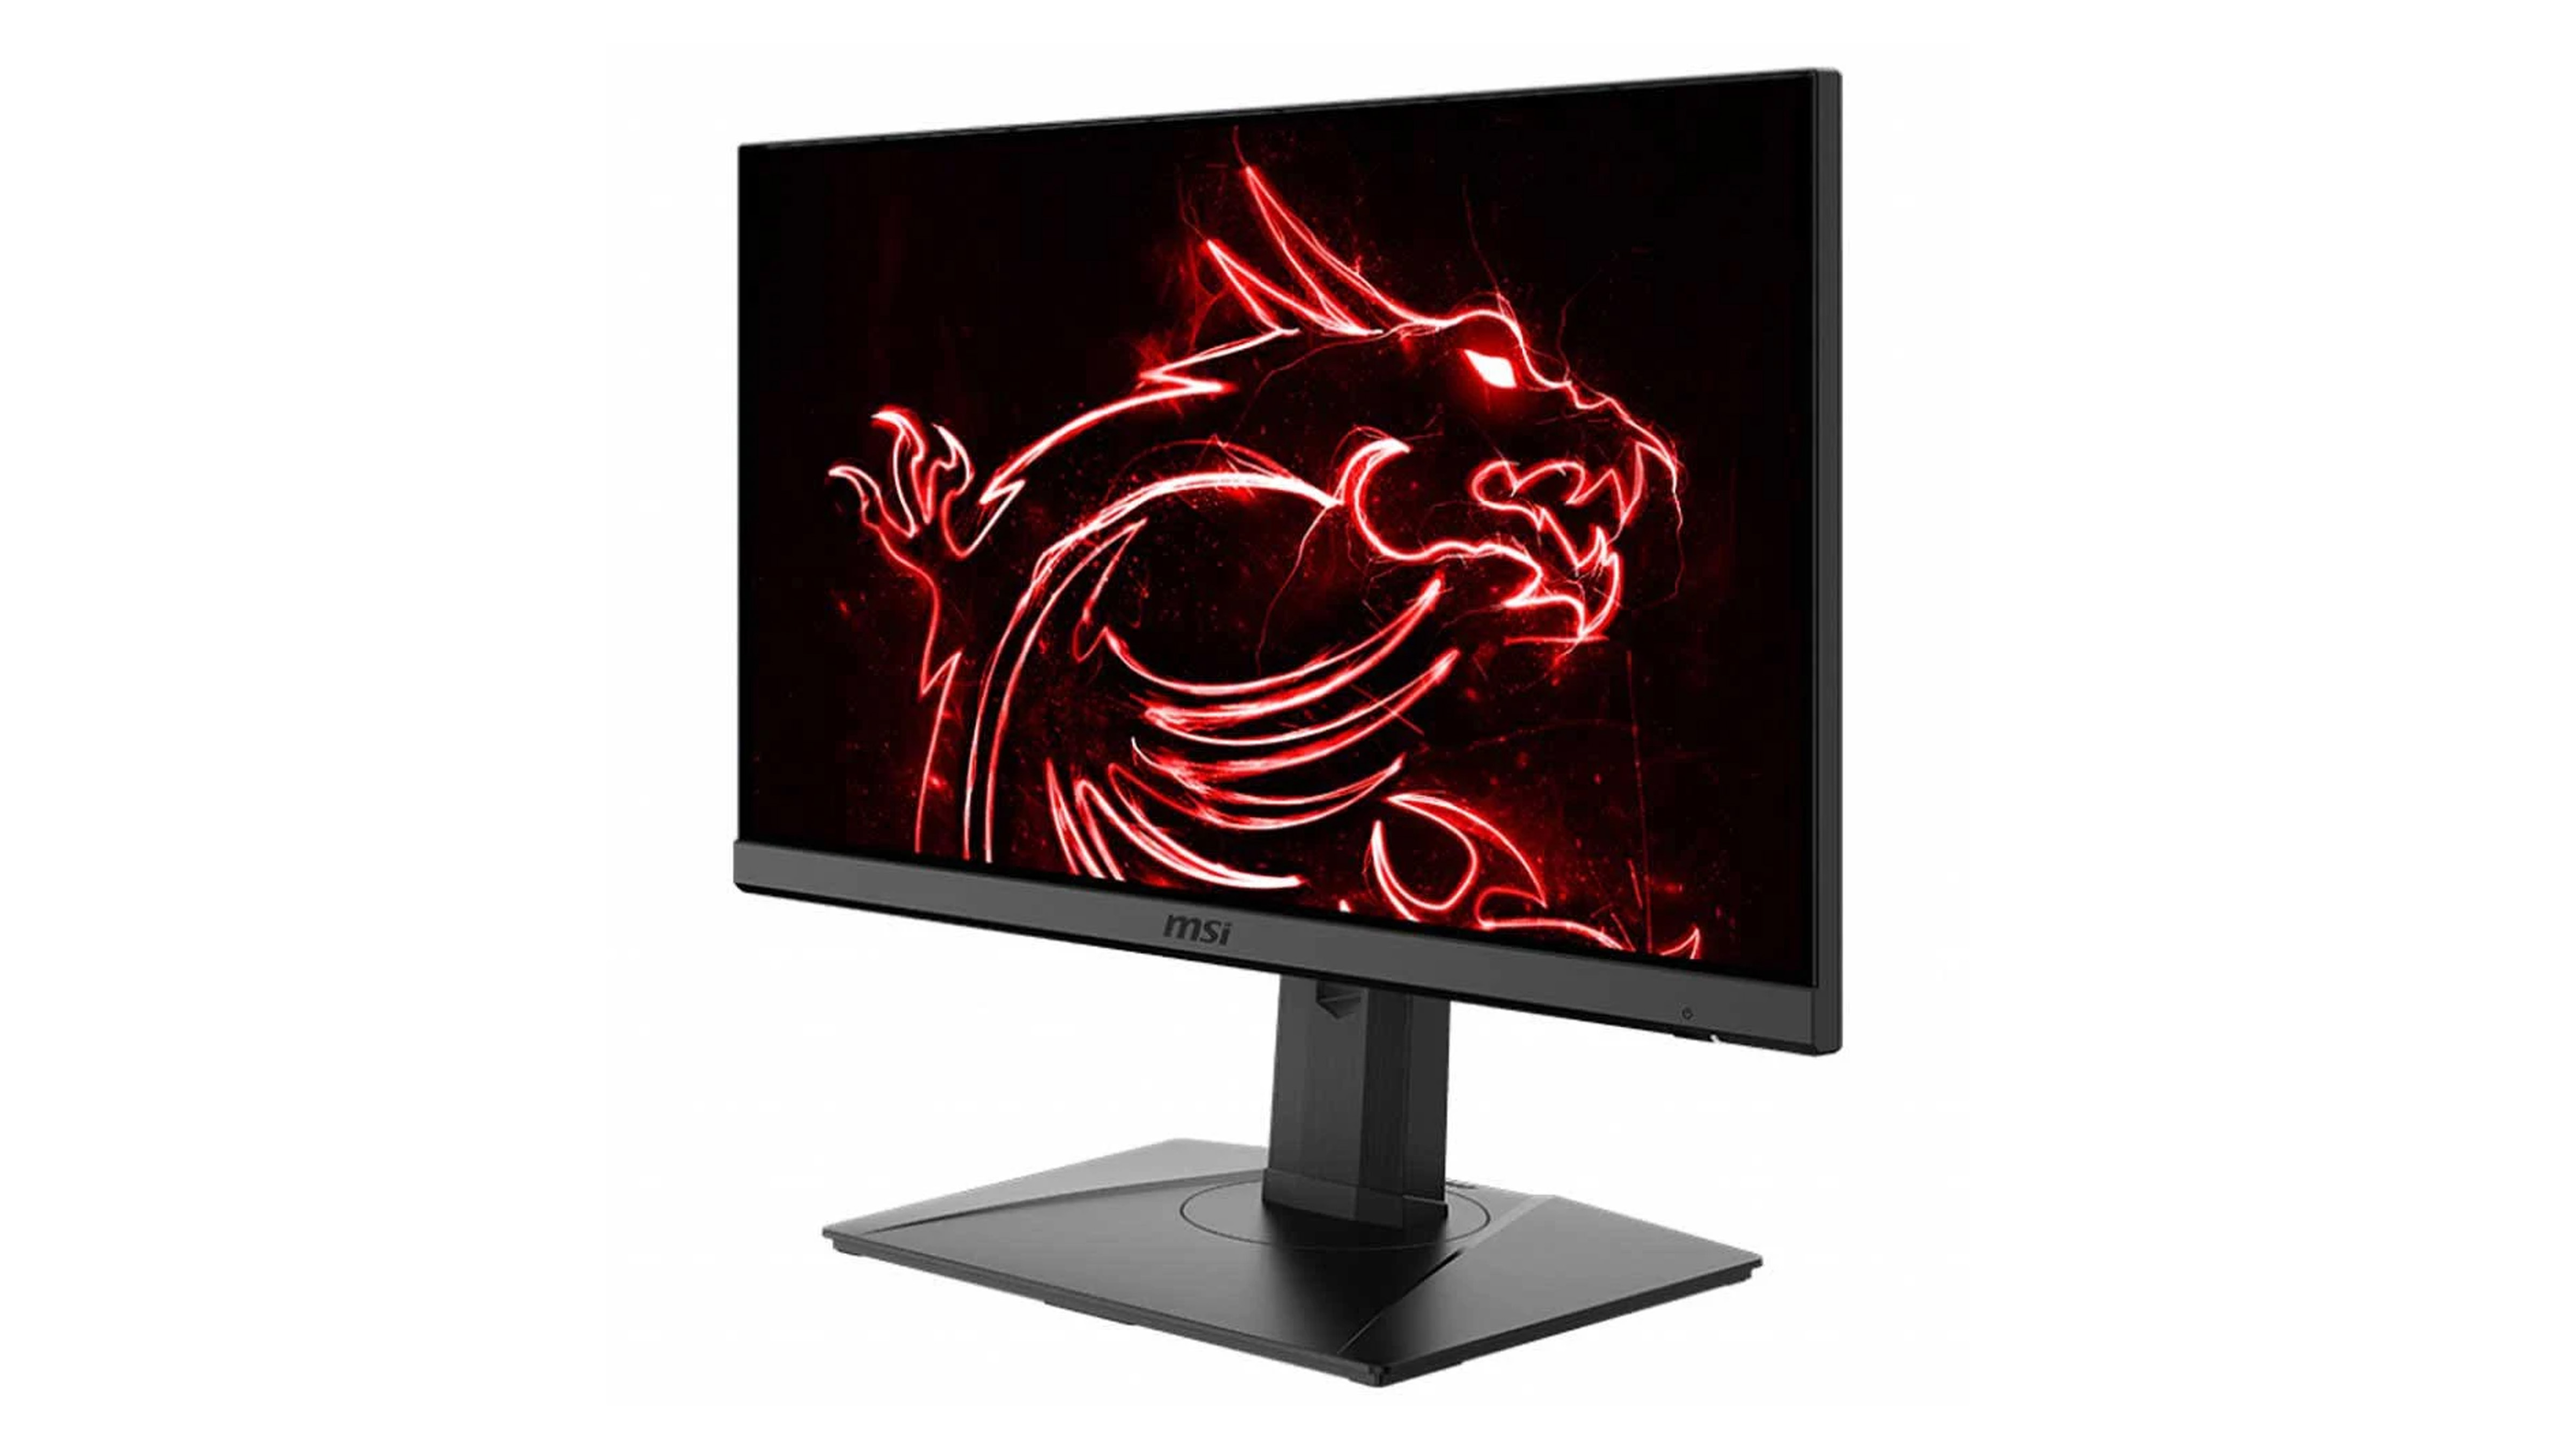 MSI Oculux NXG253R against a white background